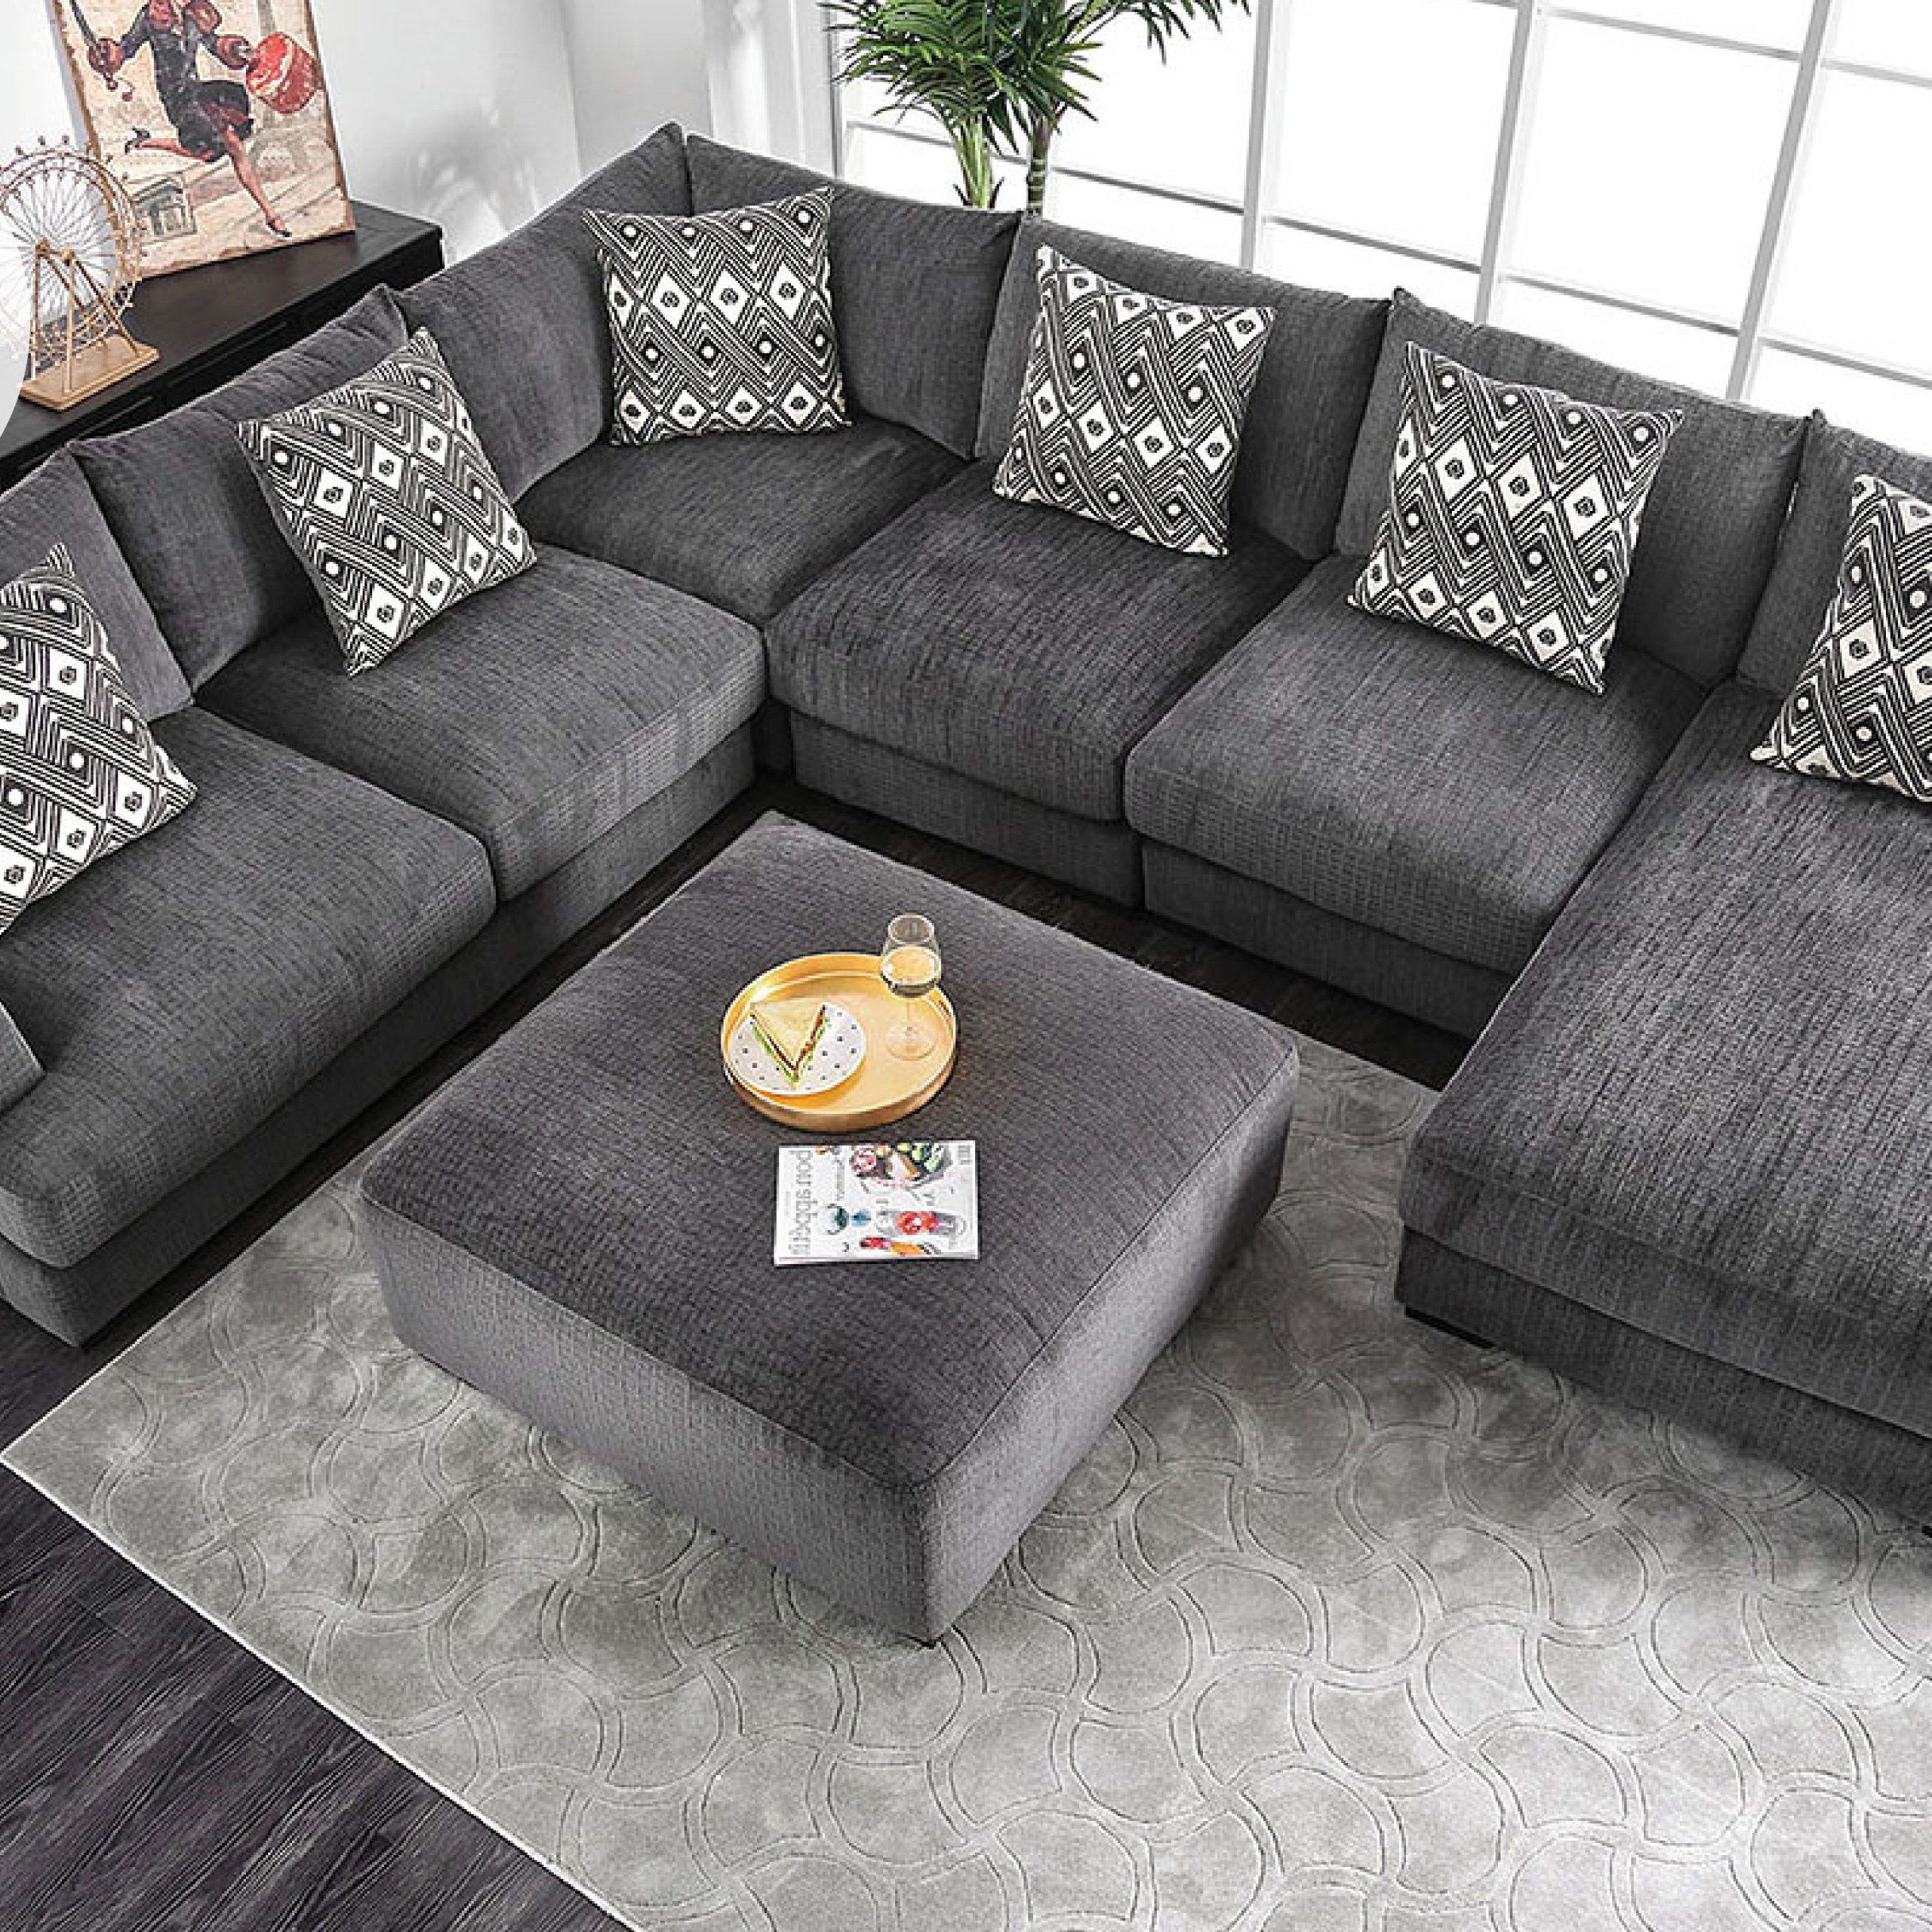 Chenille Sectional Sofas With Favorite 5 Pc Kaylee Gray Chenille Fabric Sectional Sofa Set With Chaise And (View 6 of 15)